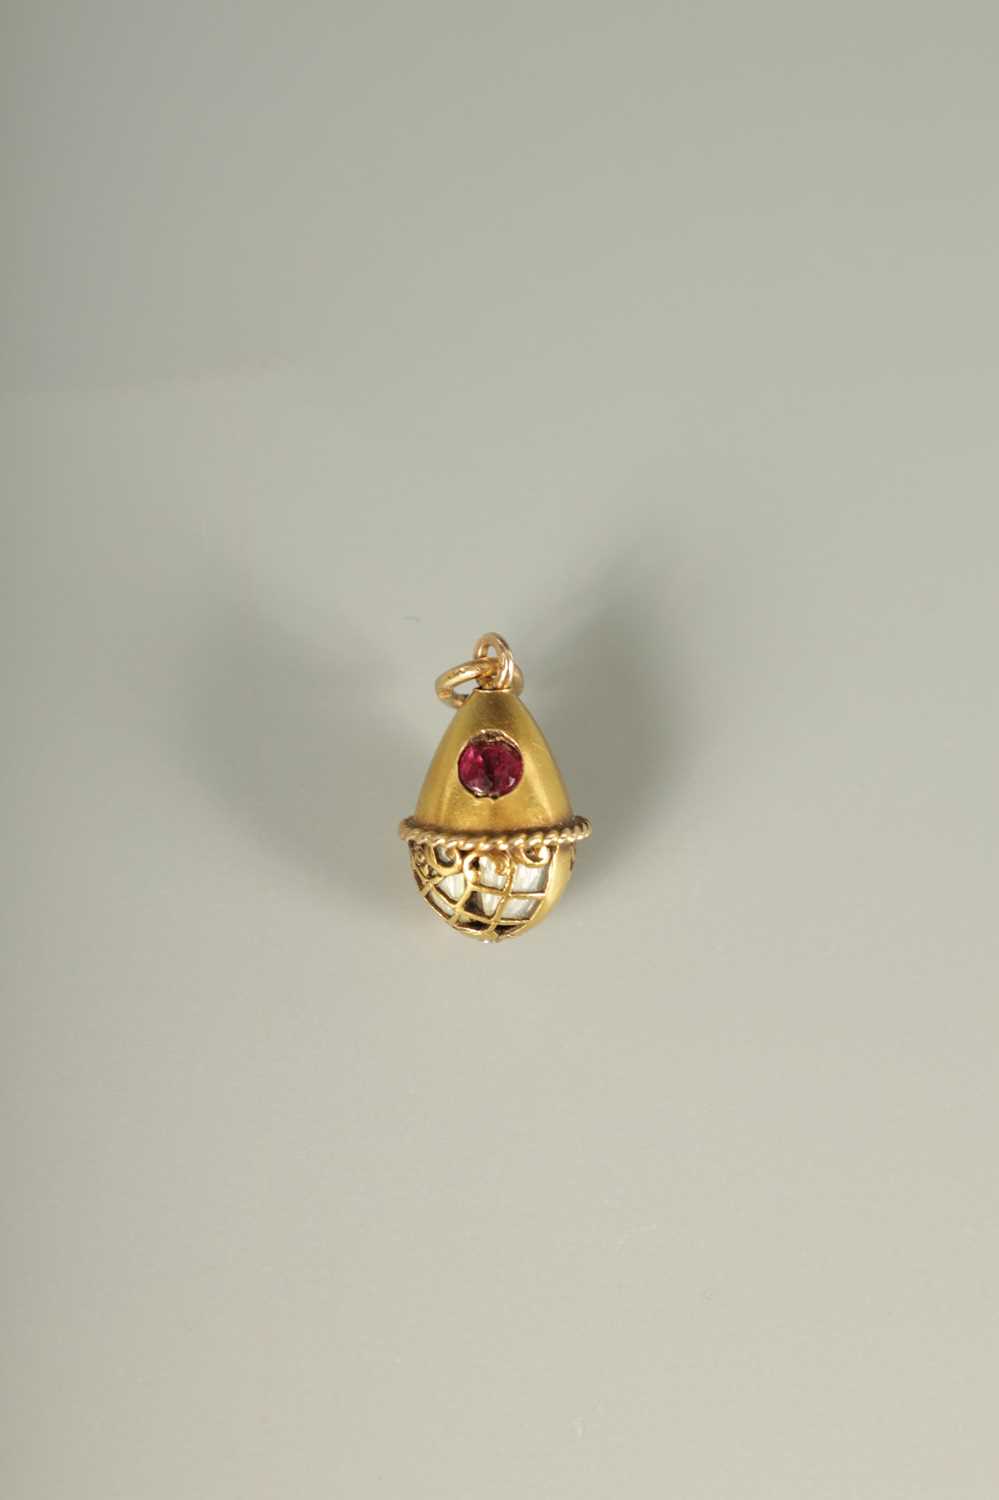 A LATE 19TH CENTURY FABERGE 14CT GOLD ENAMEL AND RUBY PENDANT EGG, WORKMASTER HENRIK WIGSTROM - Image 7 of 16